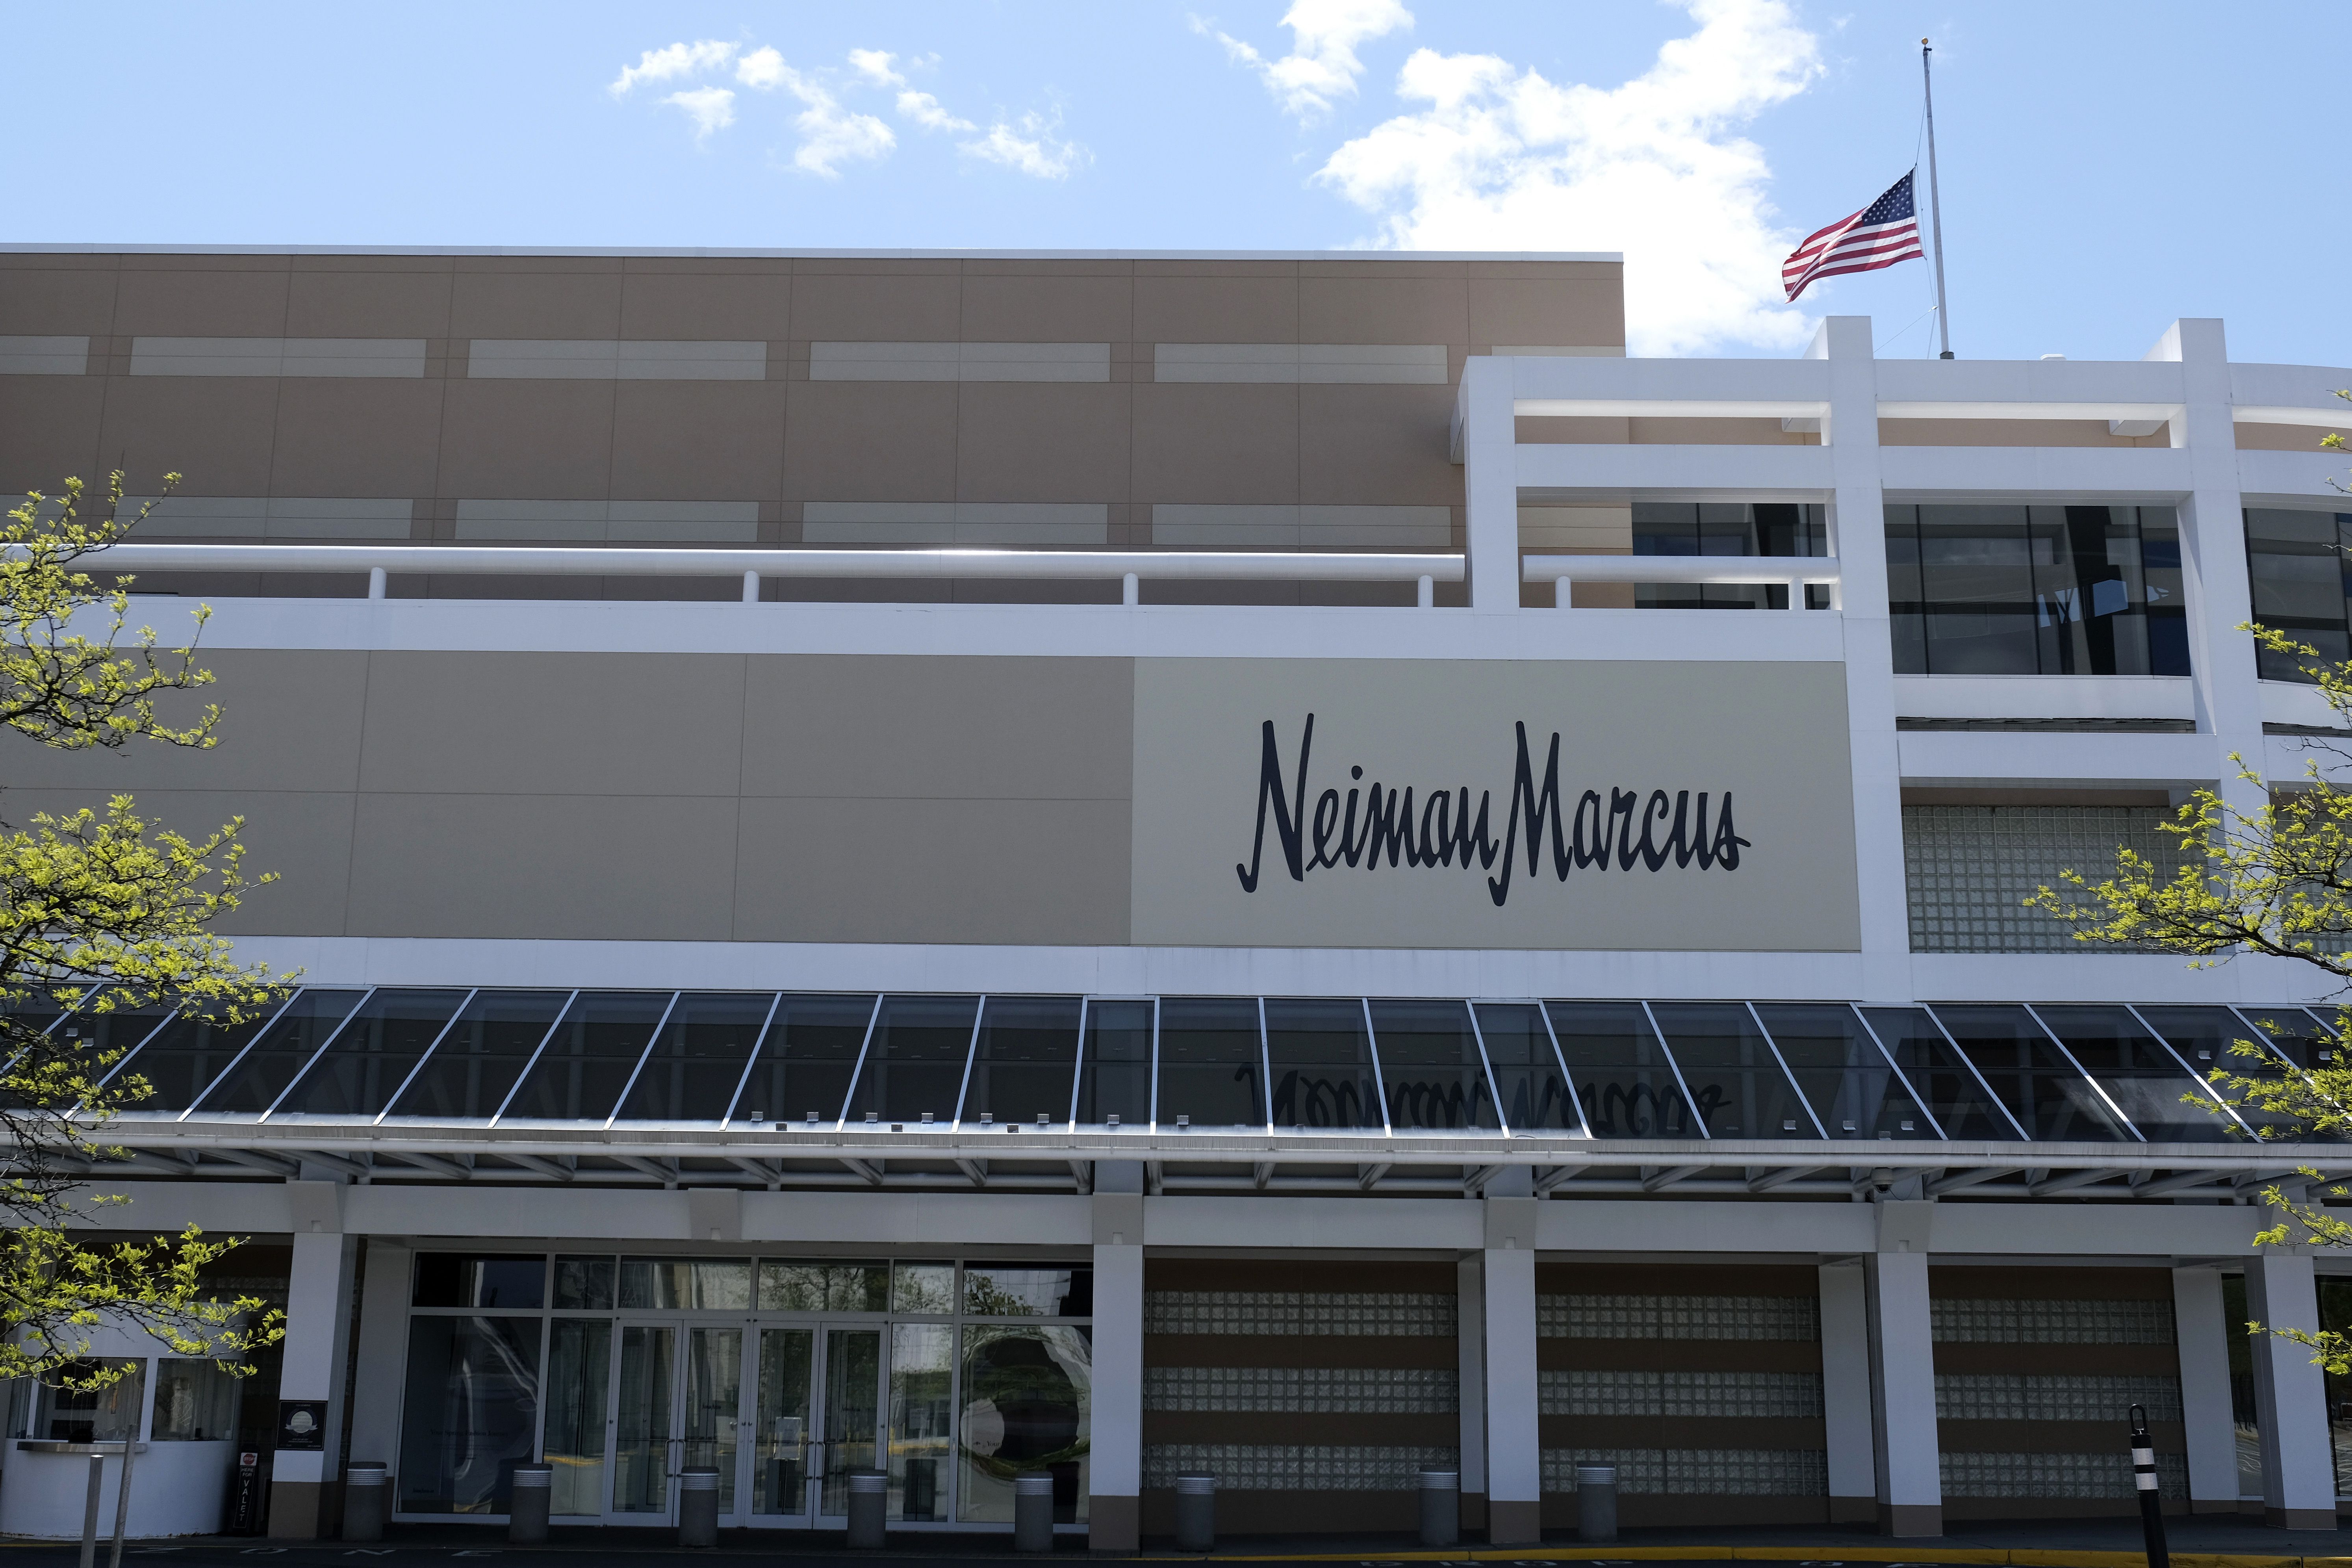 Neiman Marcus emerges from Chapter 11 bankruptcy - New York